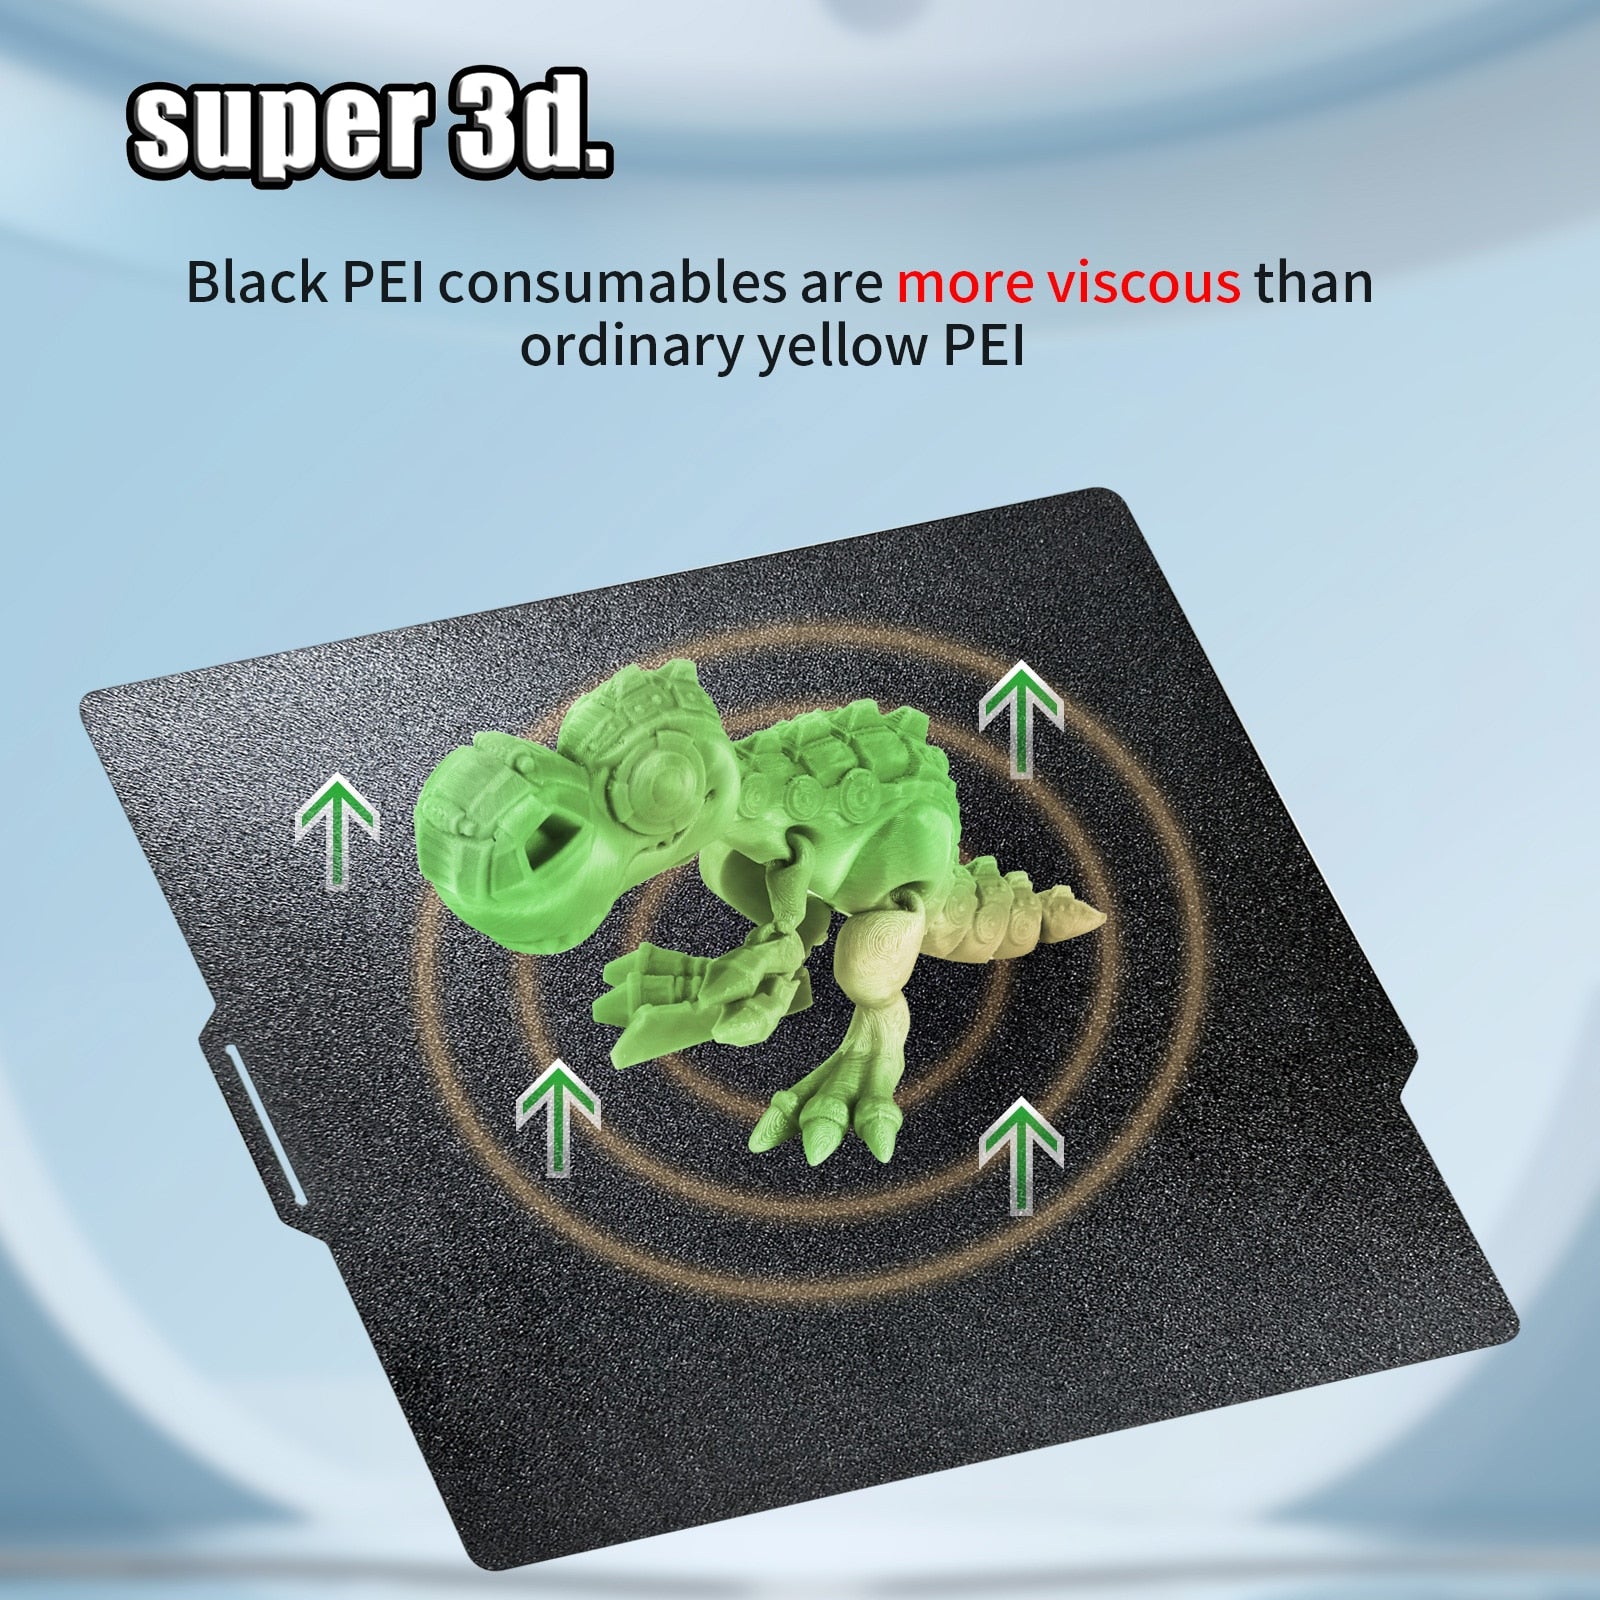 New 5D PED PEI Sheet for bambu lab magnetic bulid plate Smooth PED Upgrade Black texture PEI Bed for bambu lab P1P X1 3D Printer